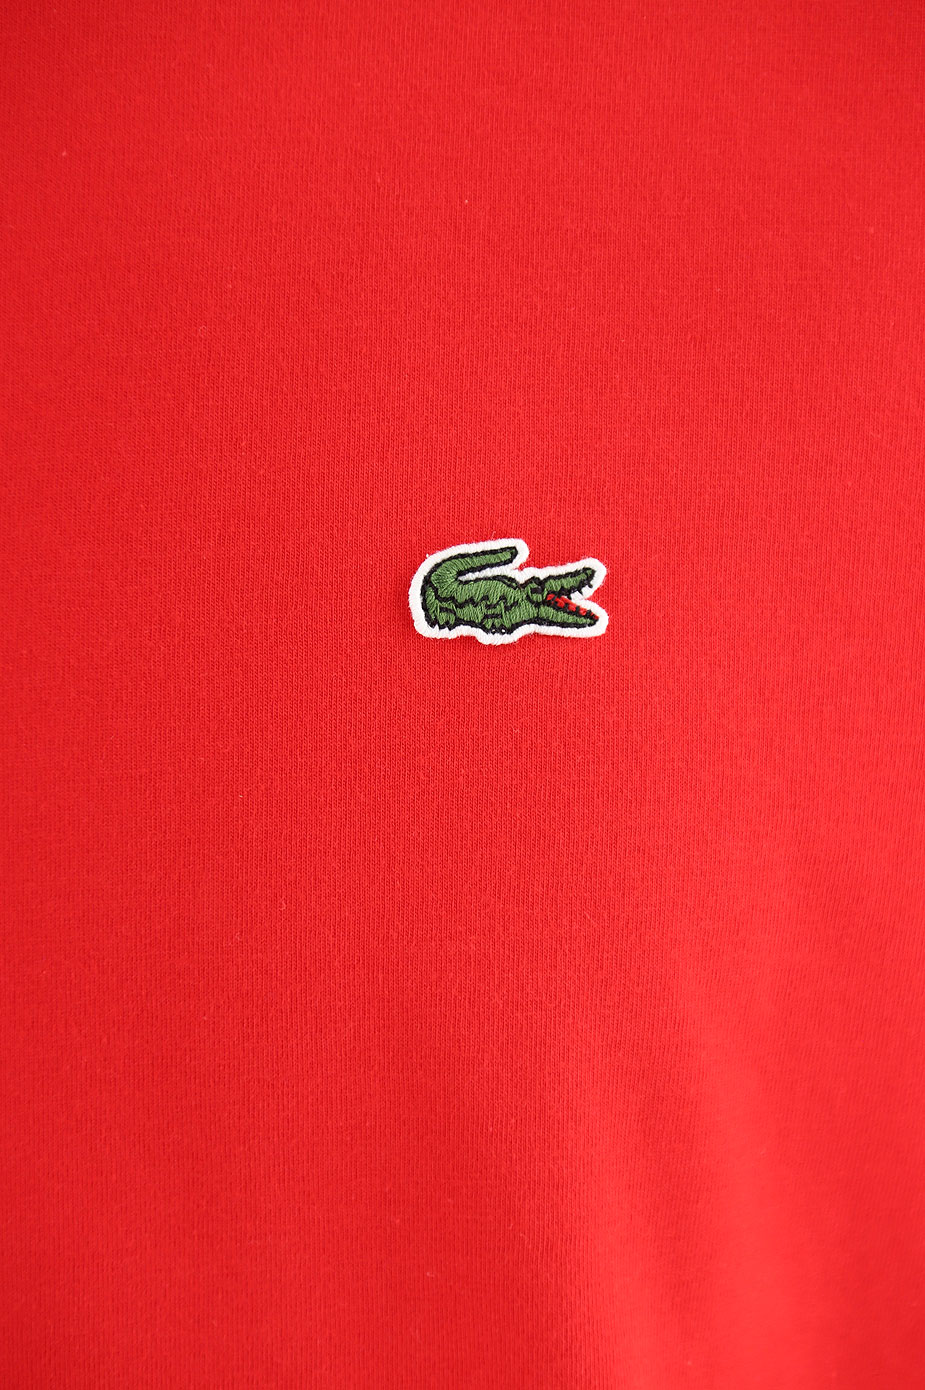 Mens Clothing Lacoste, Style code: th6709-240-